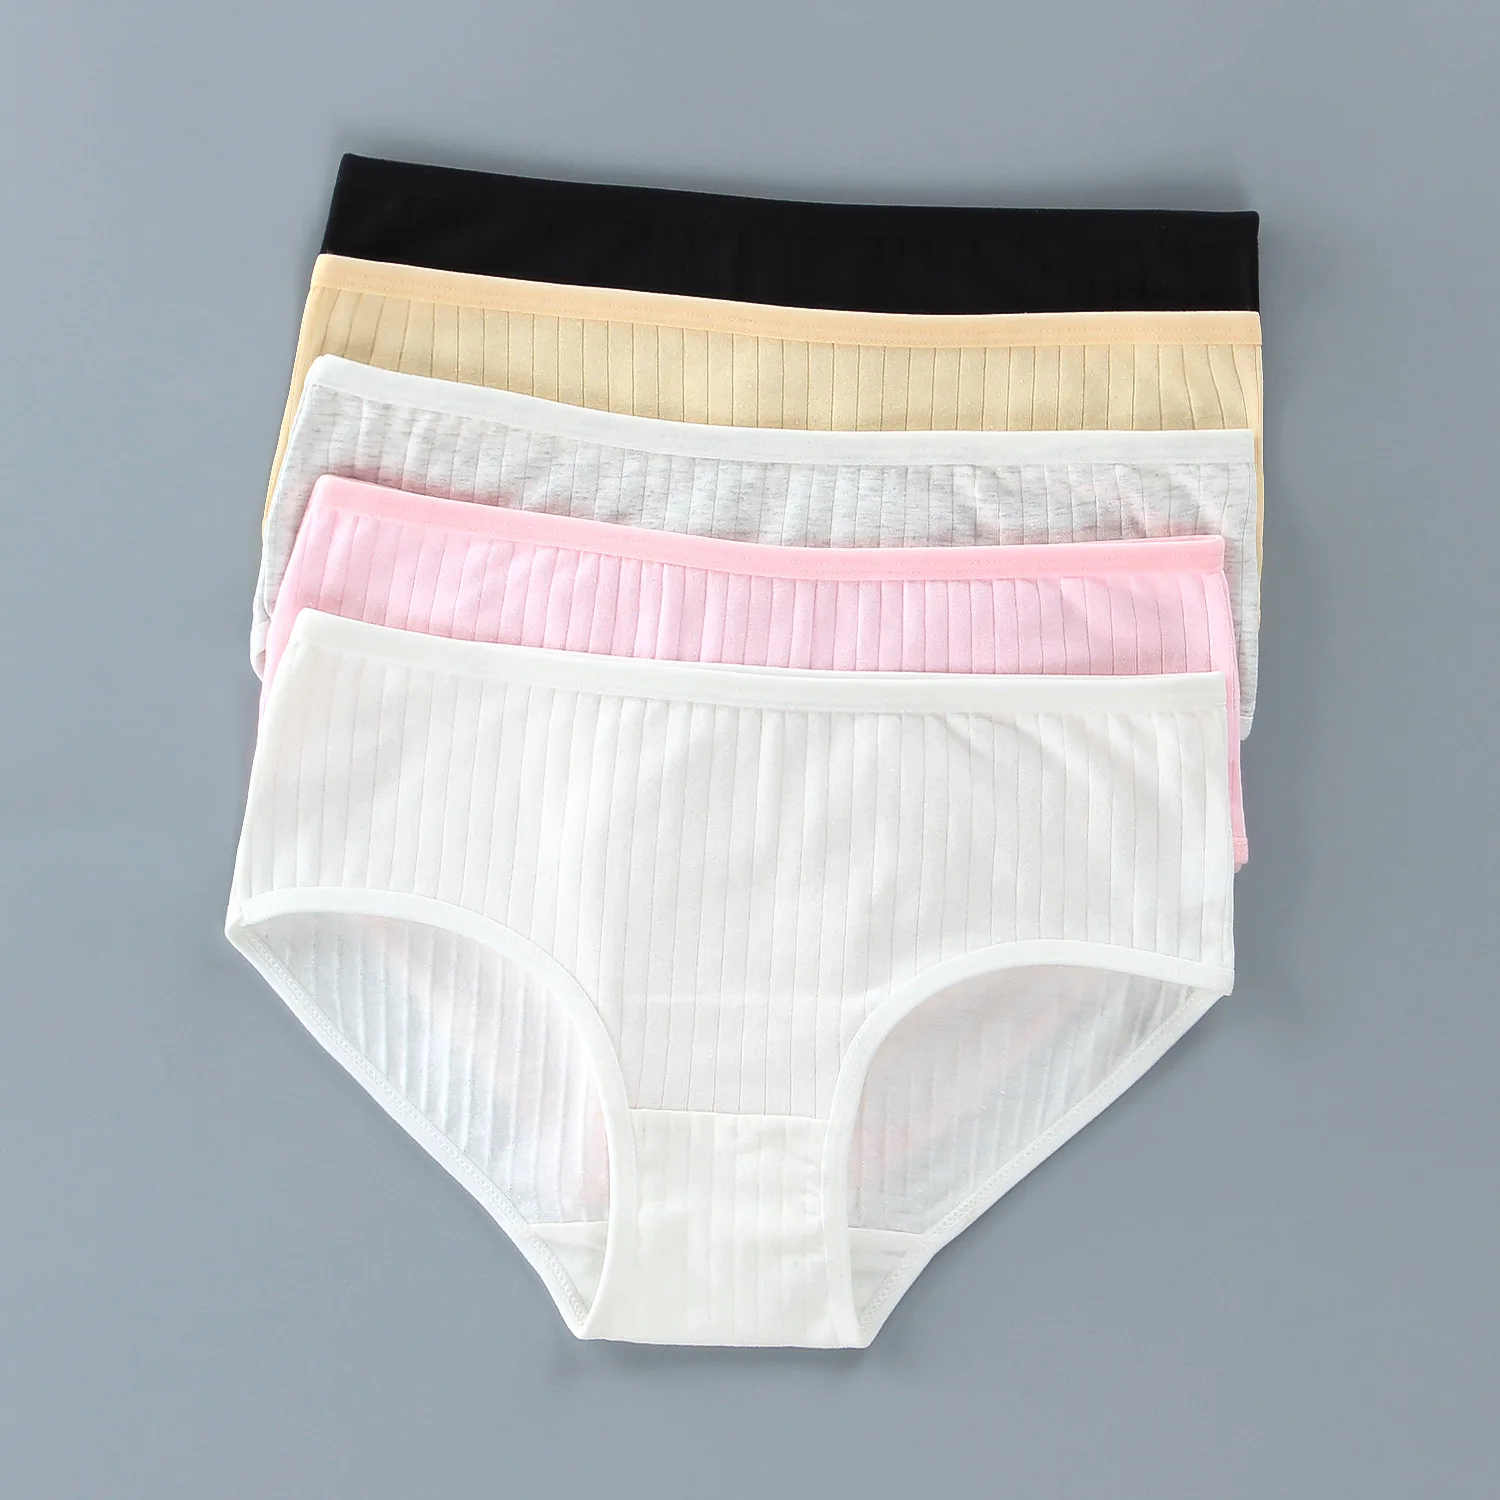 little underwear teens, little underwear teens Suppliers and